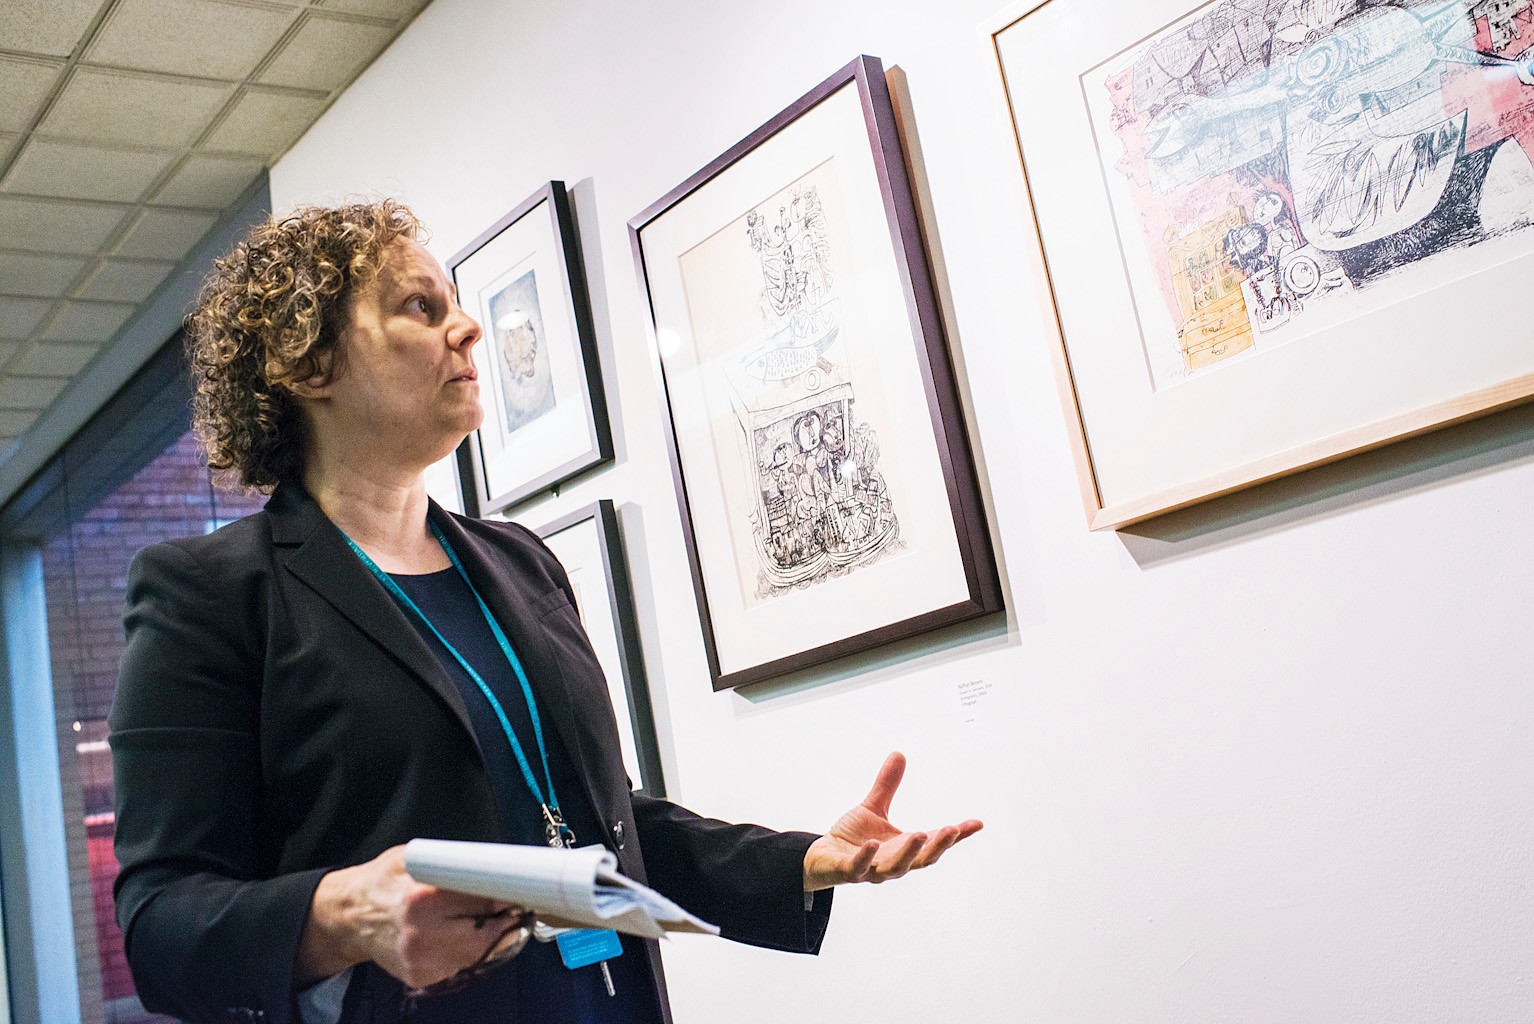 Hebrew Home museum curator Susan Chevlowe gives a tour of a new surrealist art exhibit on Monday morning.